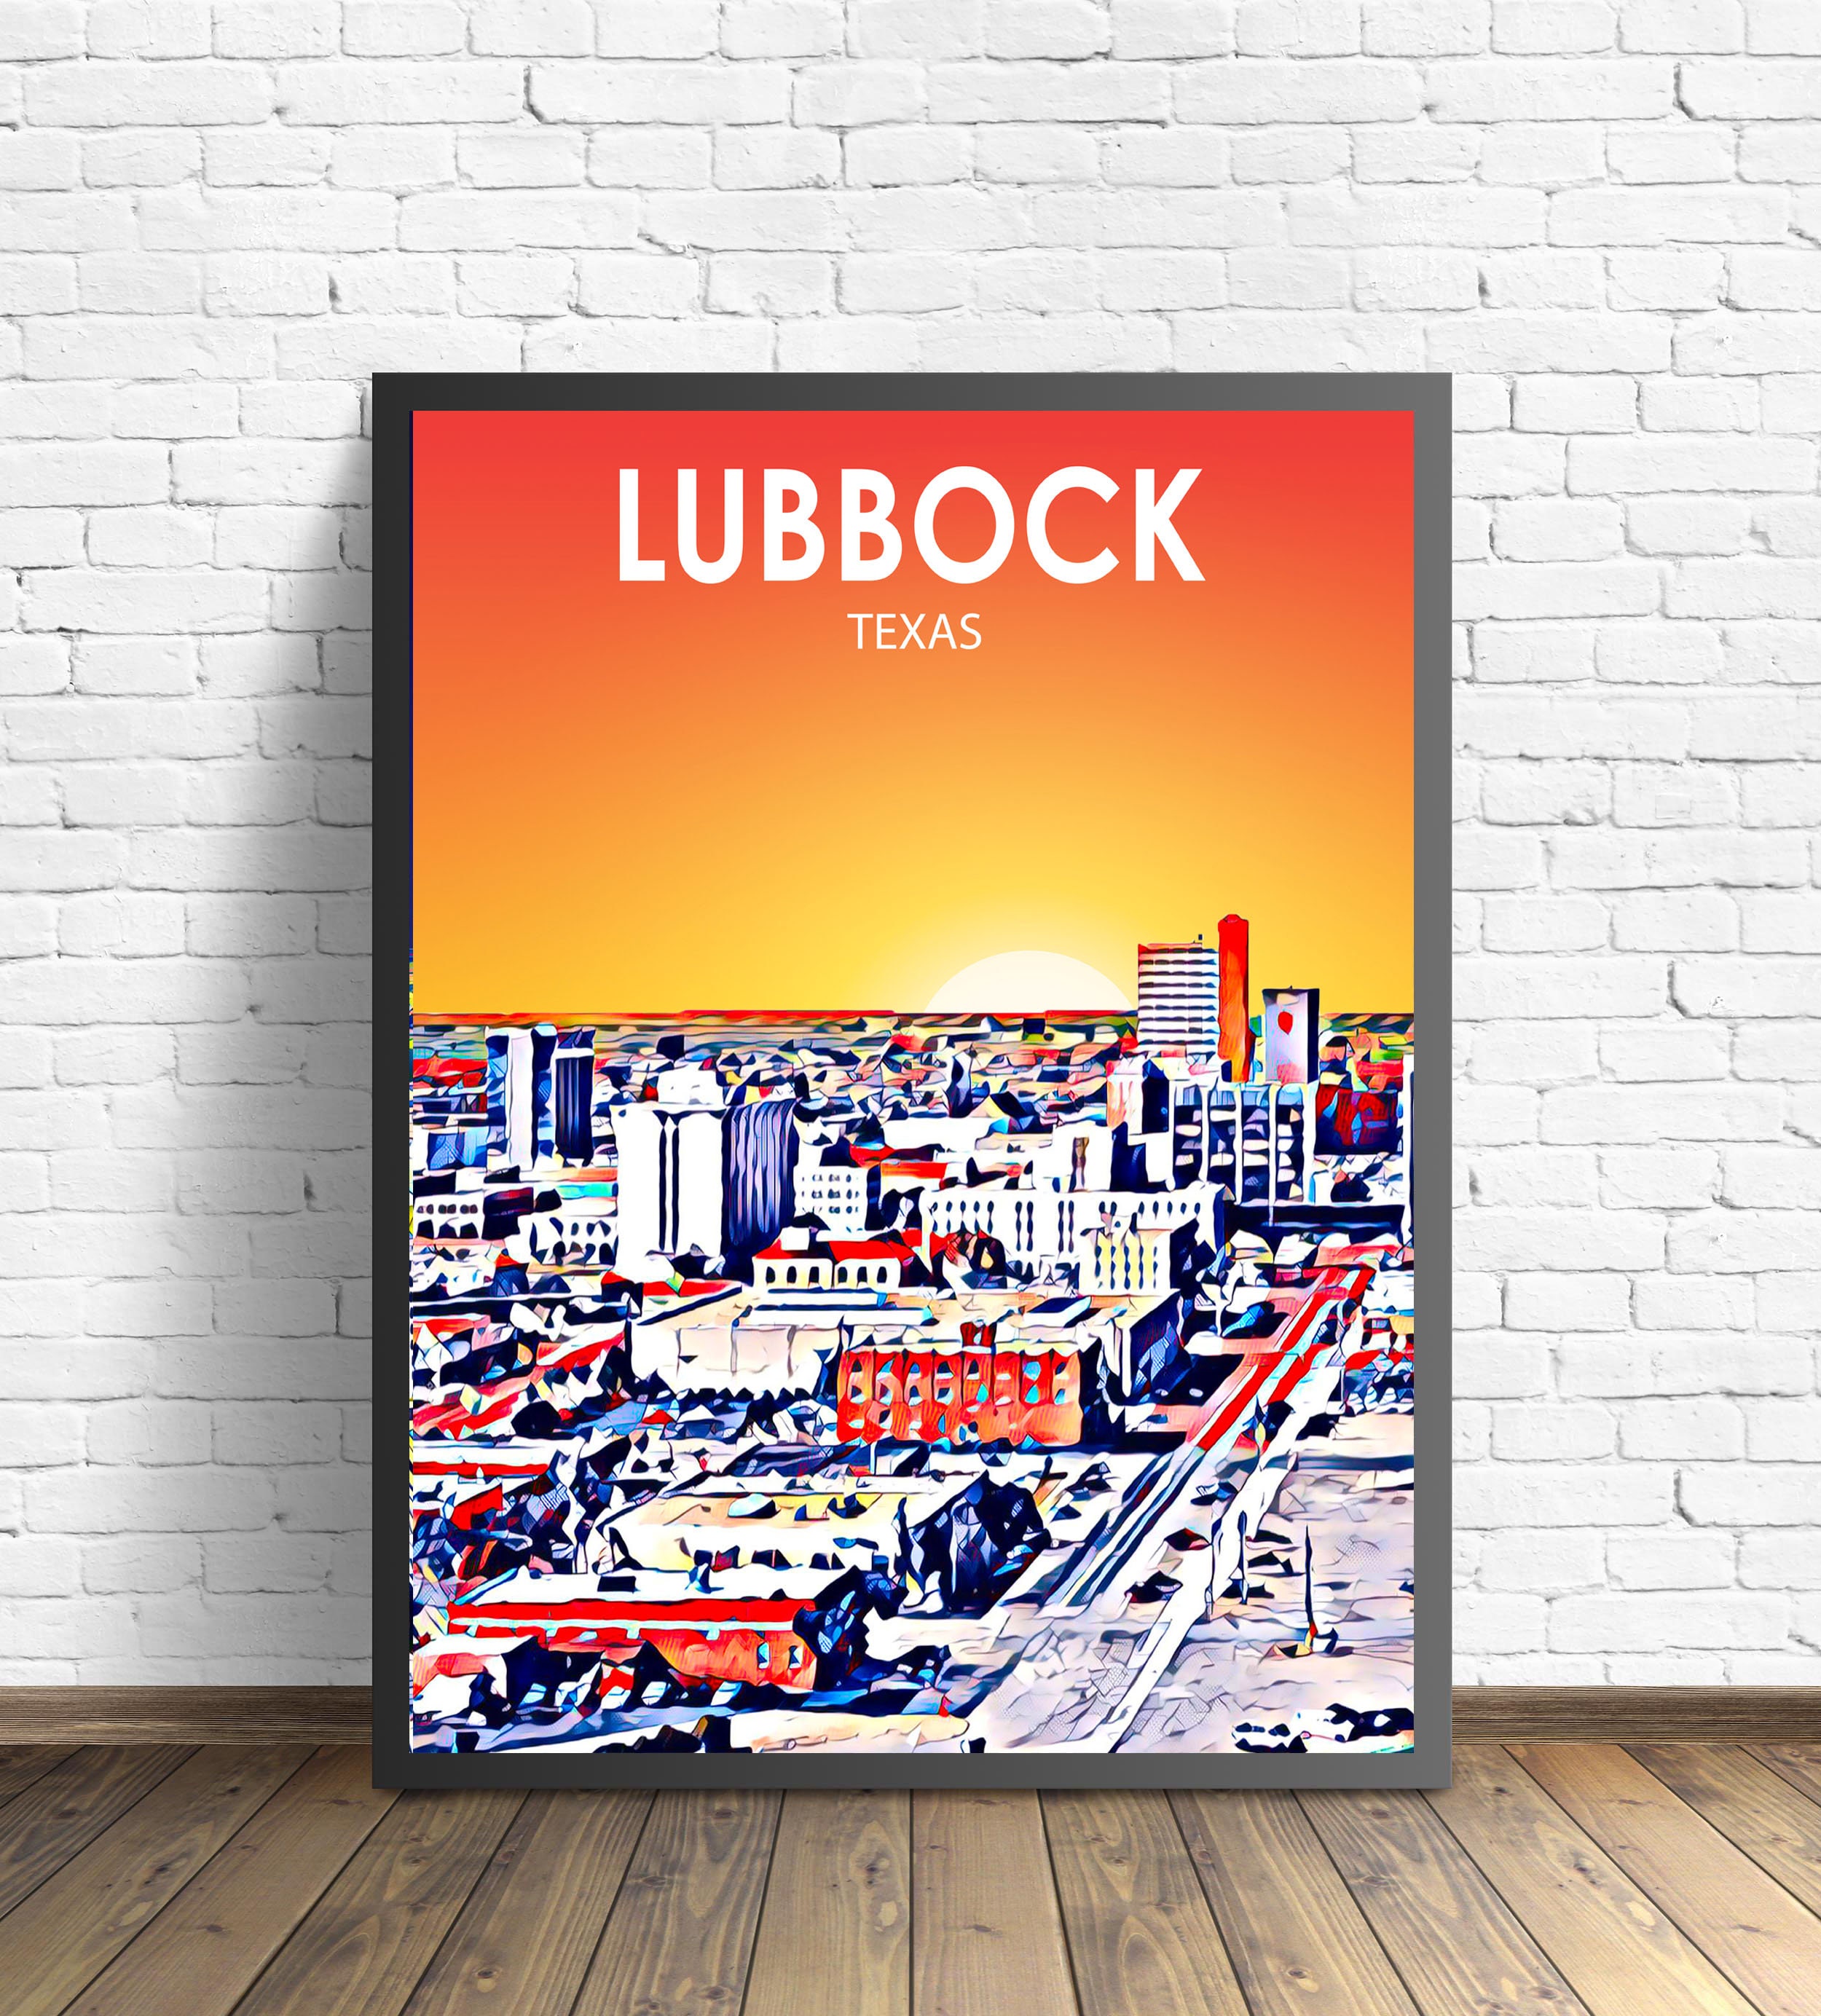 Buy 11x14 Canvas Painting Kit (1 canvas) at Lubbock, TX